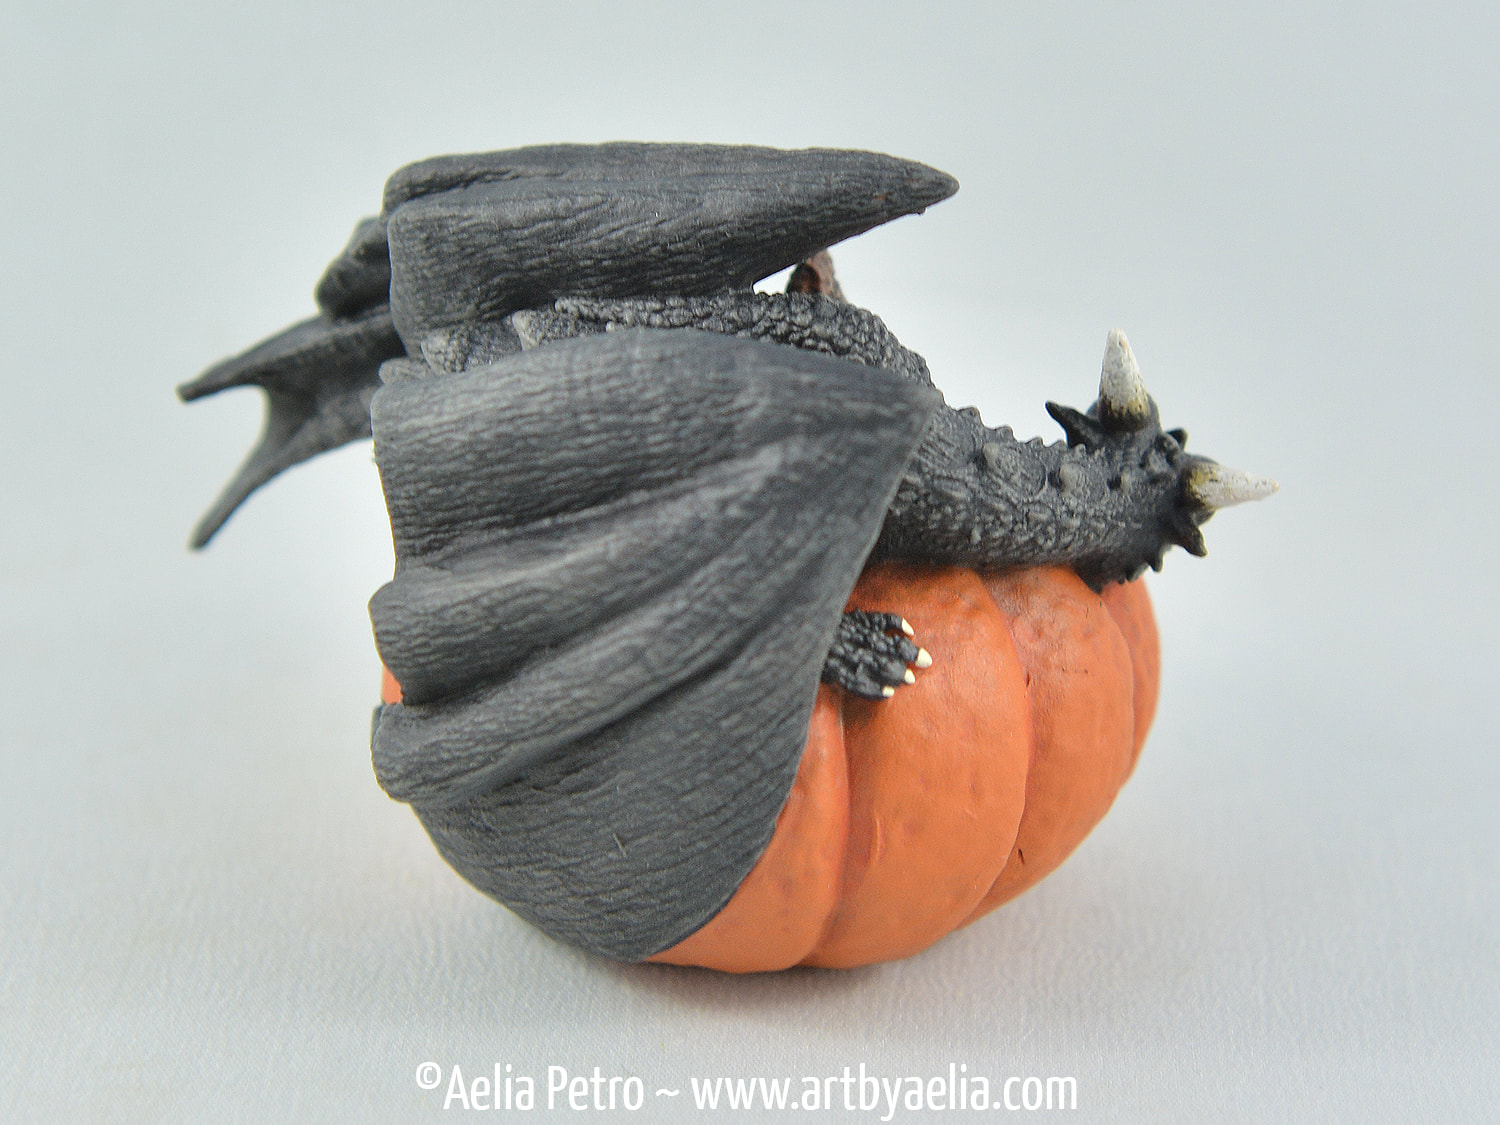 how to train your dragon pumpkin pattern